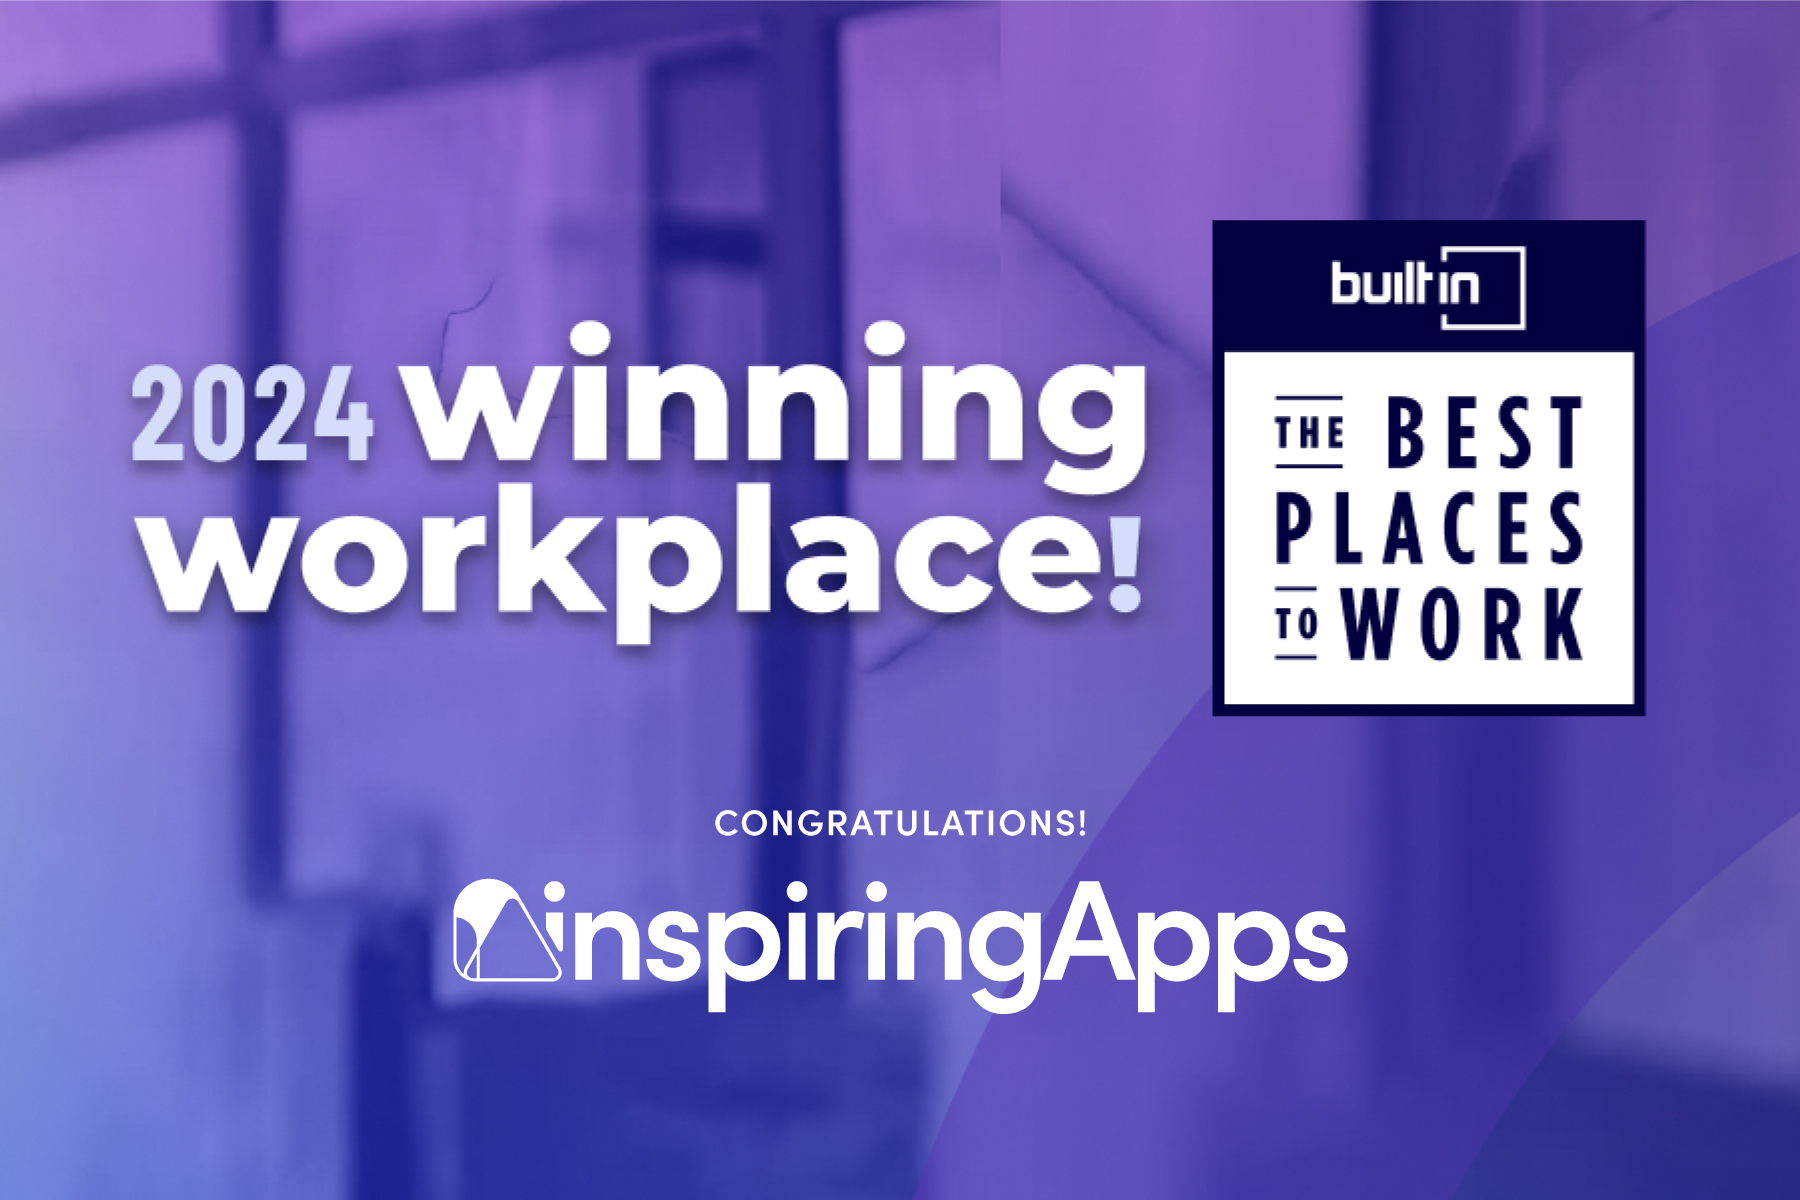 Built In Honors InspiringApps in Its Esteemed 2024 Best Places To Work Awards Image